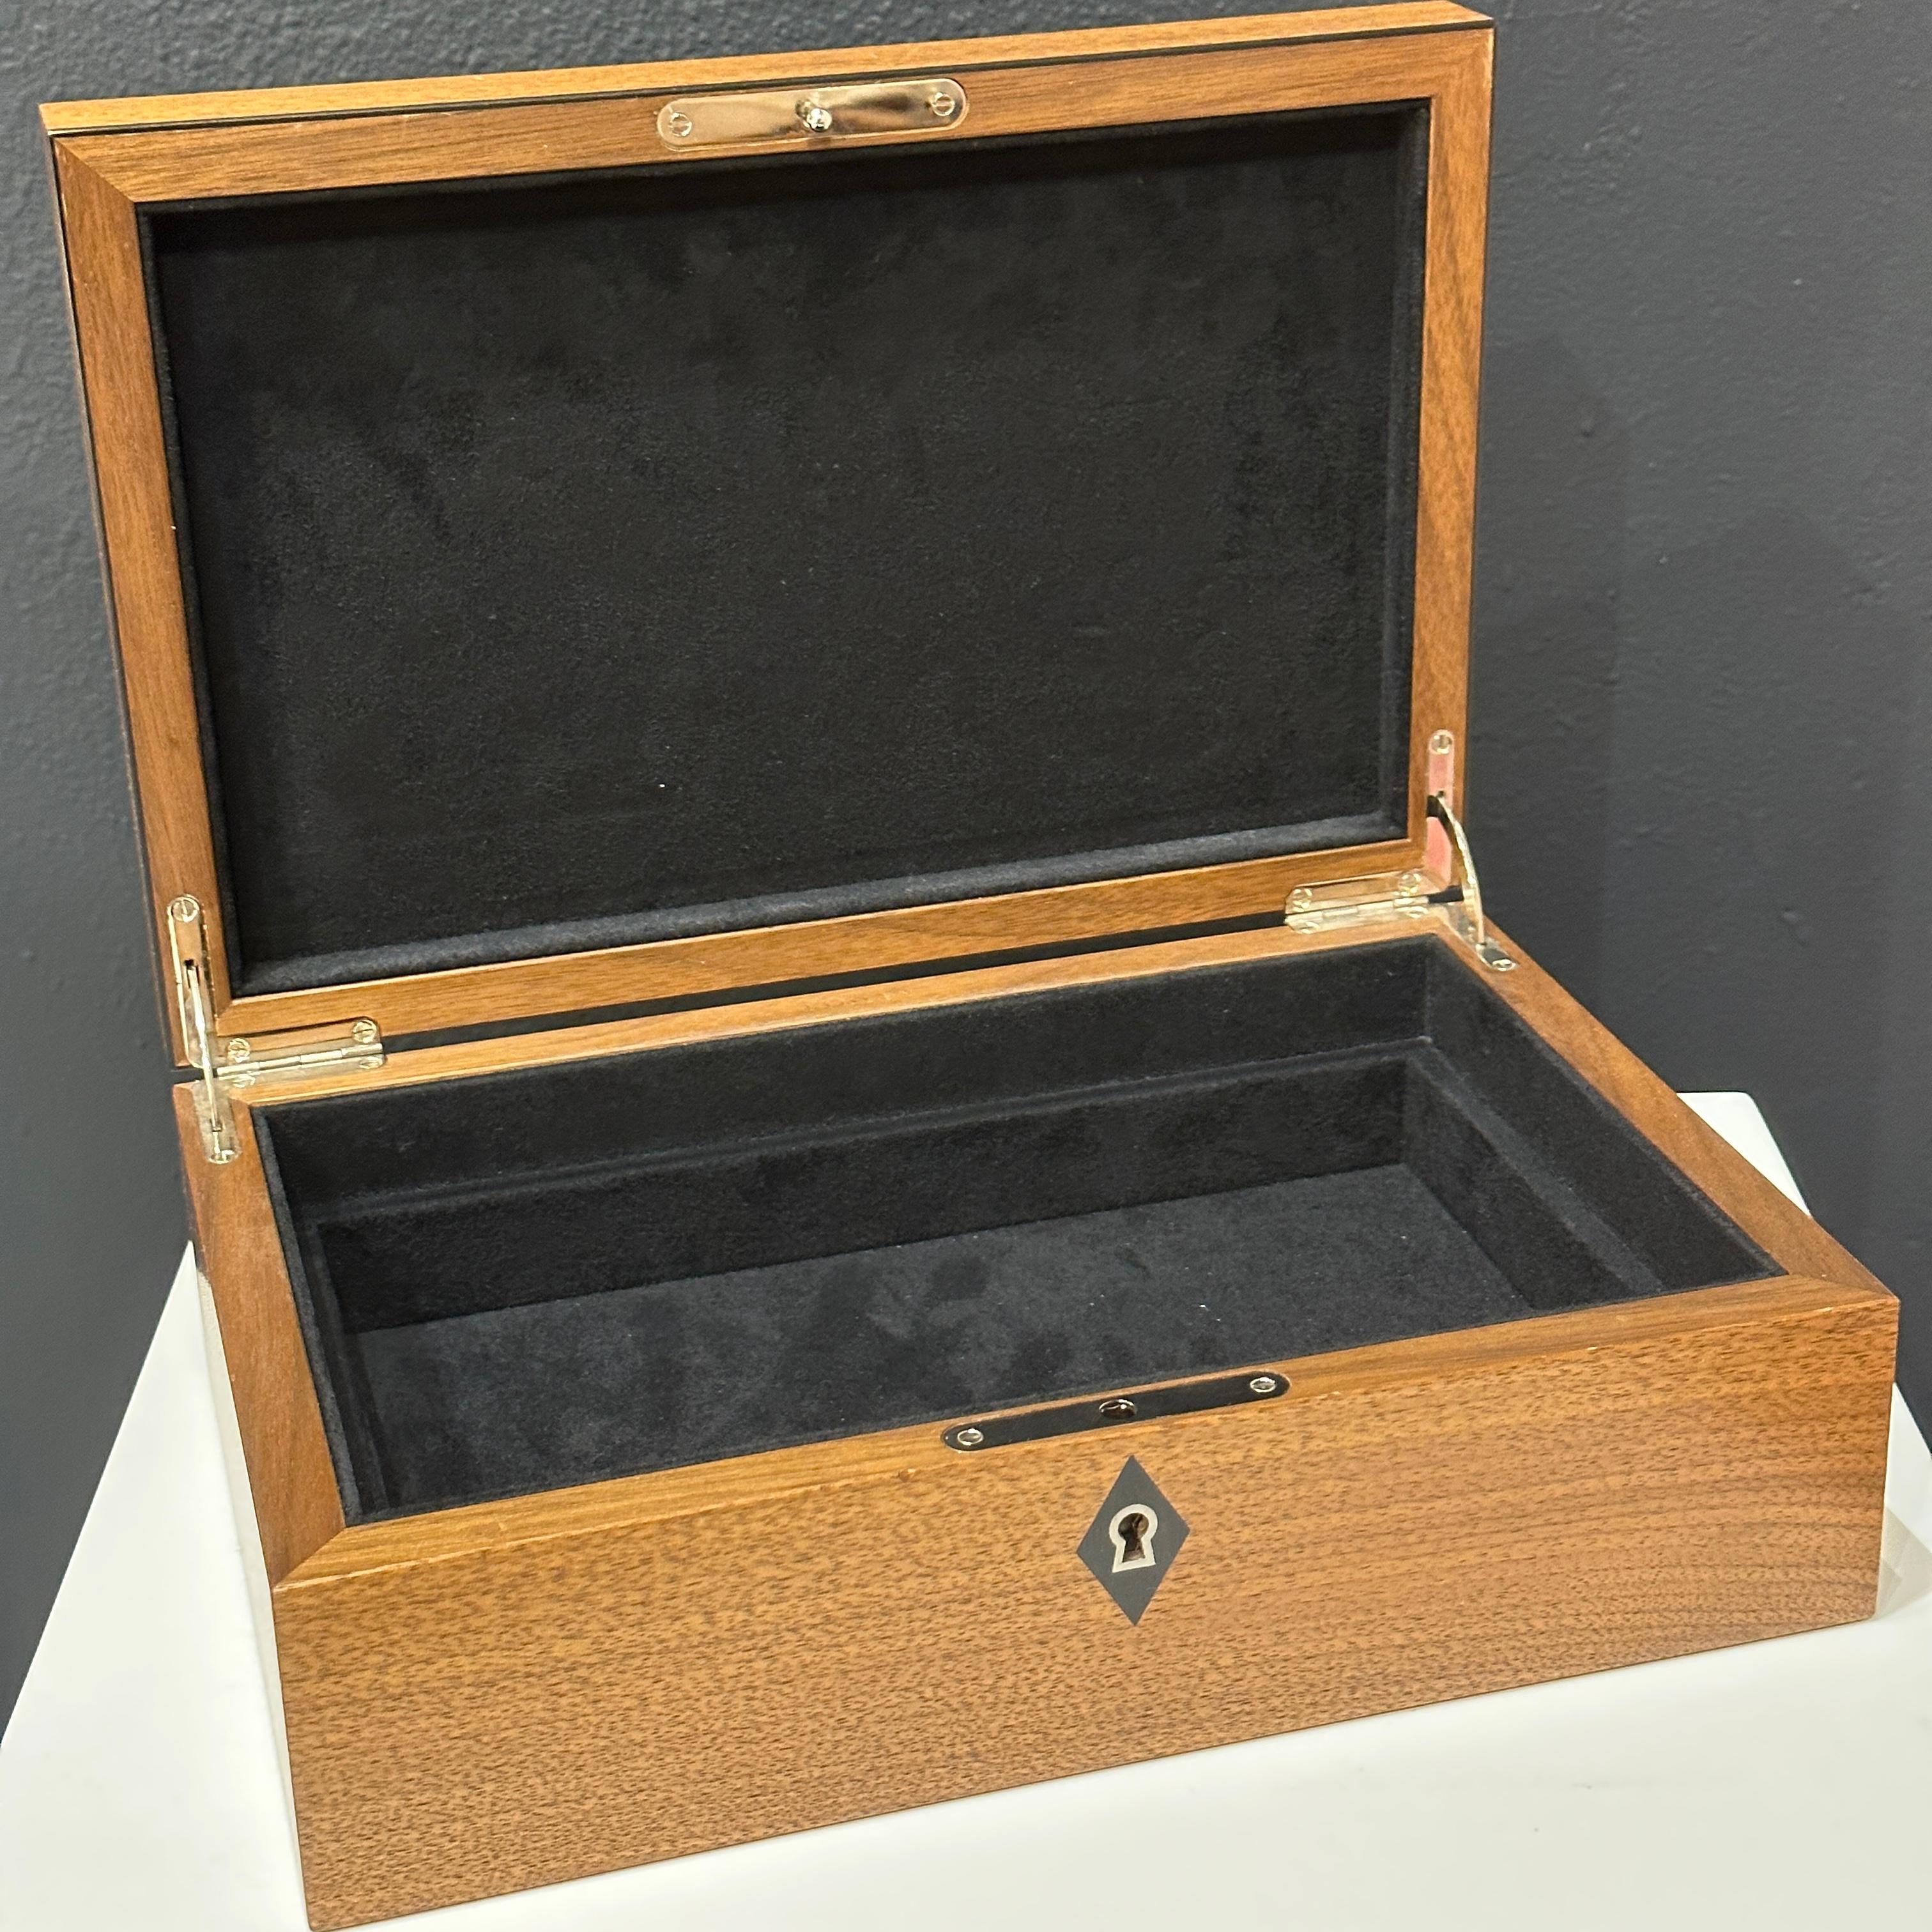 Wood David Linley London Marquetry Watch and Cufflink Jewelry Box with Key